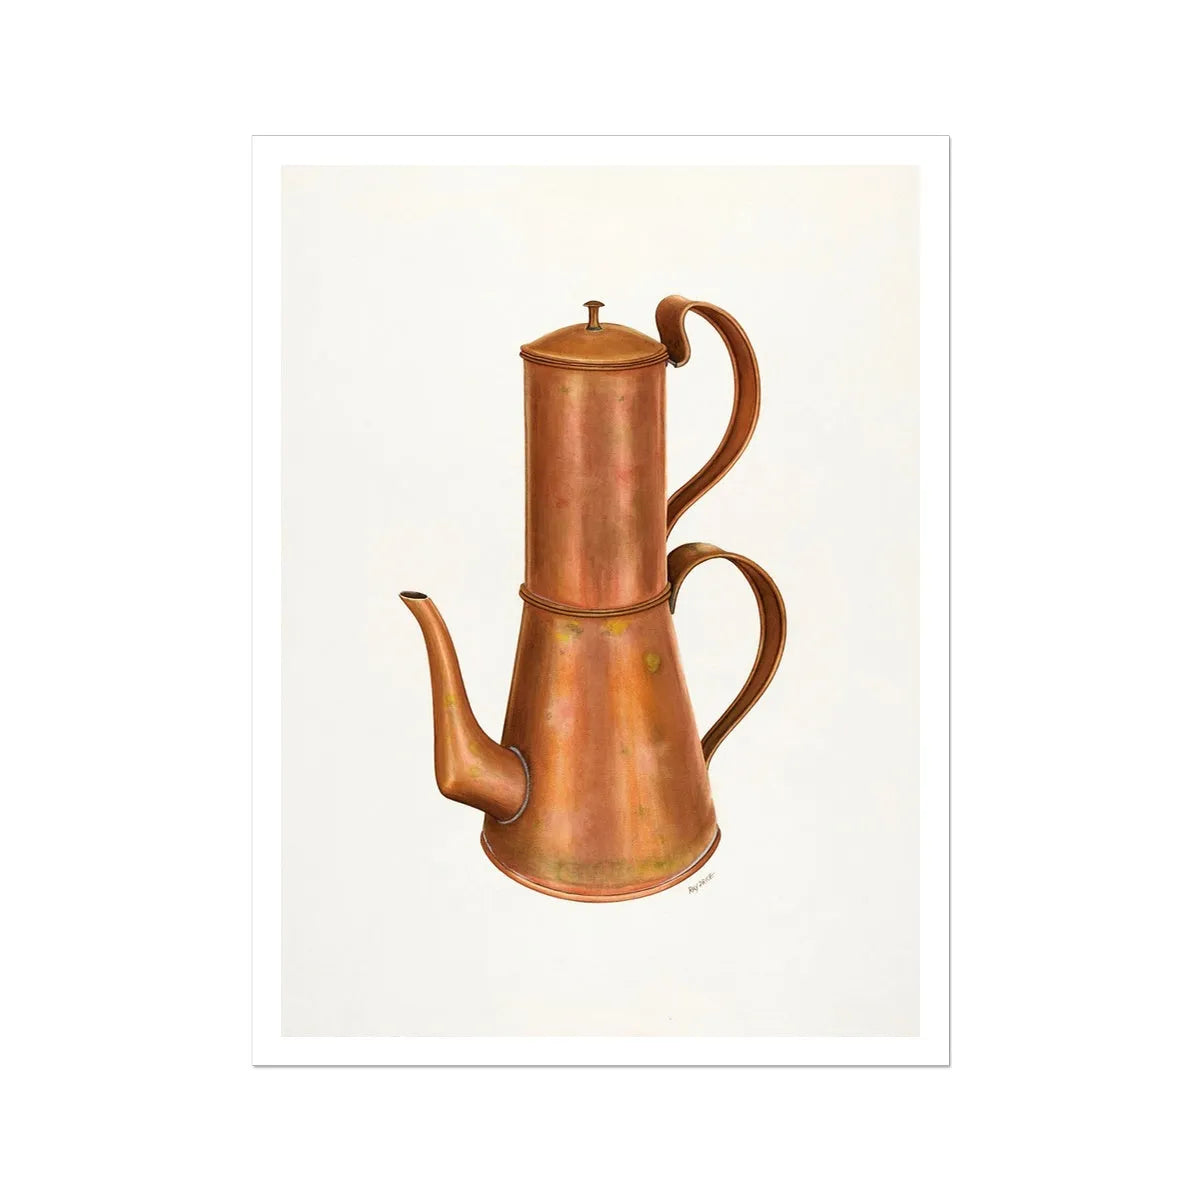 Coffee Pot By Ray Price Fine Art Print - Posters Prints & Visual Artwork - Aesthetic Art